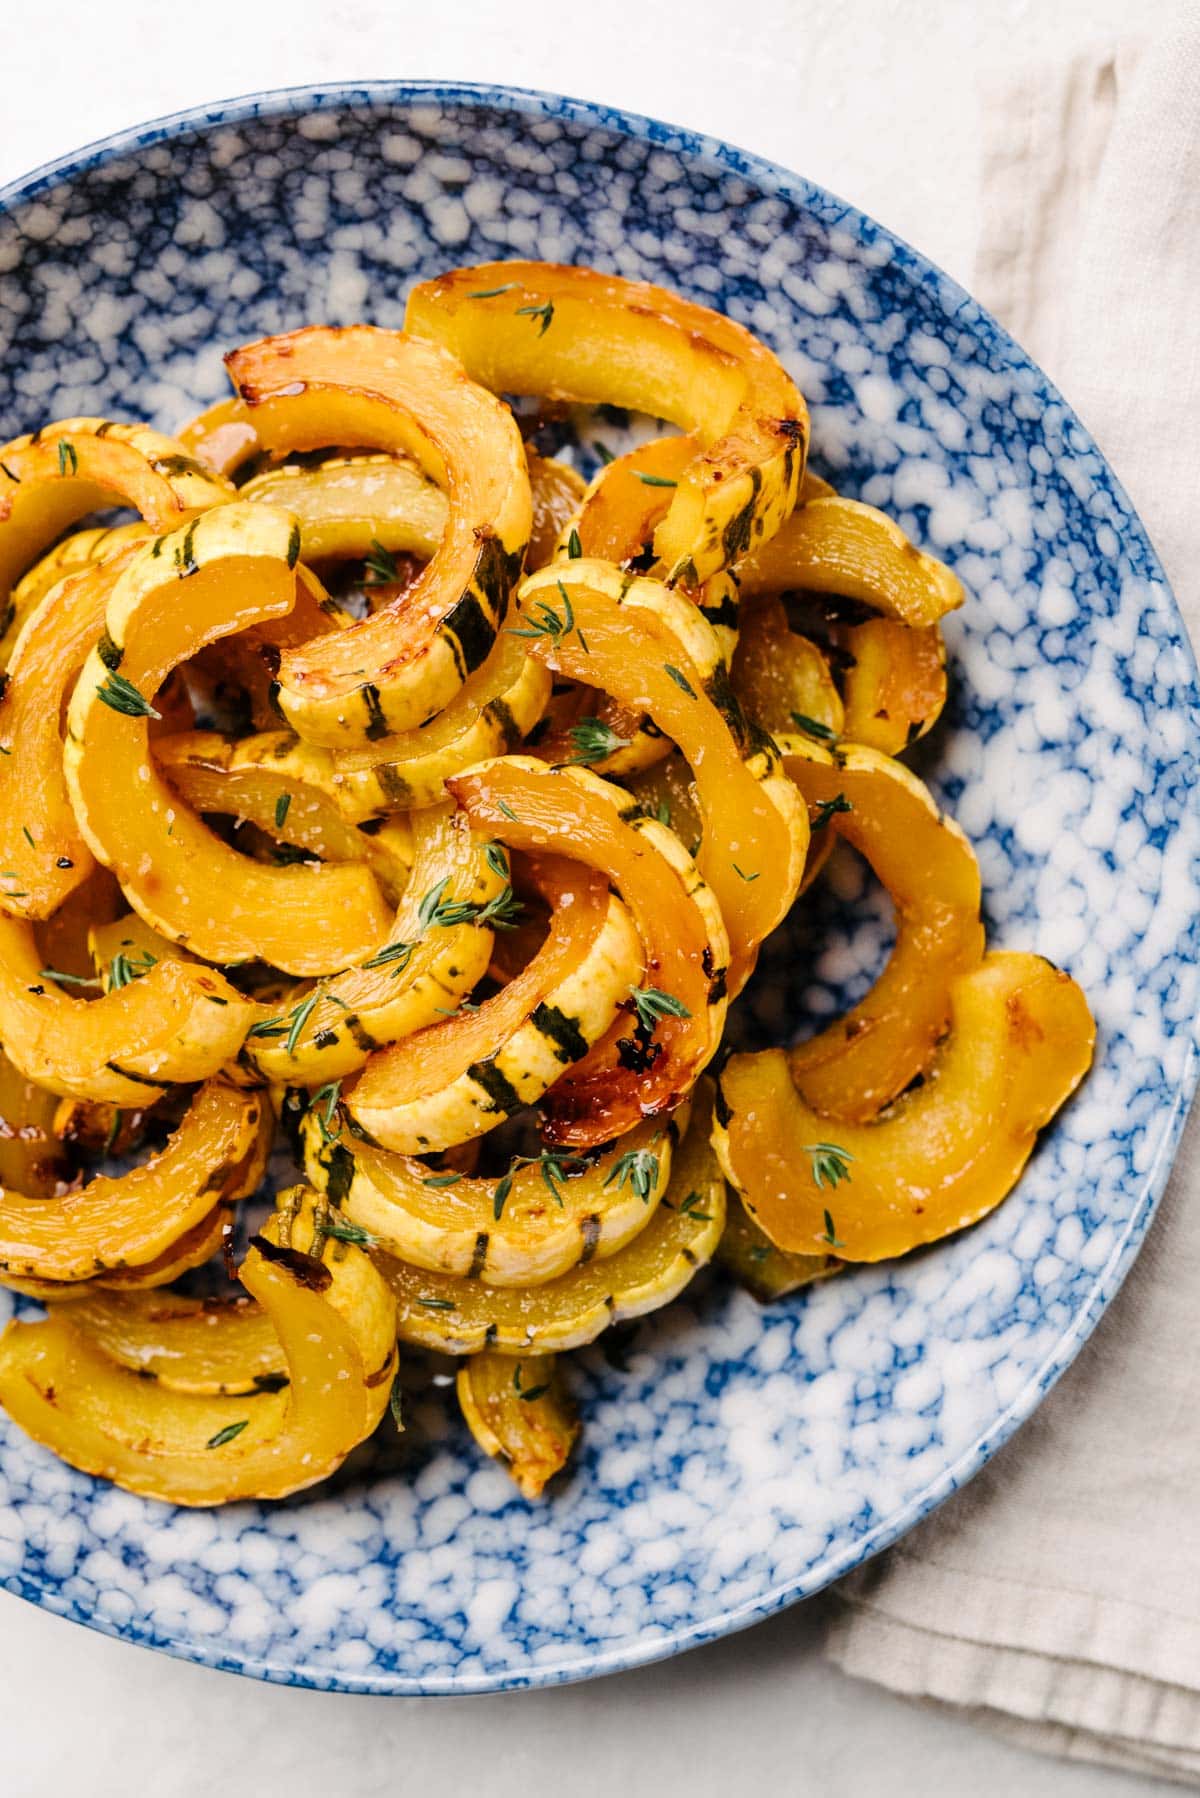 Roasted delicata squash slices in a blue speckled bowl, garnished with fresh thyme.